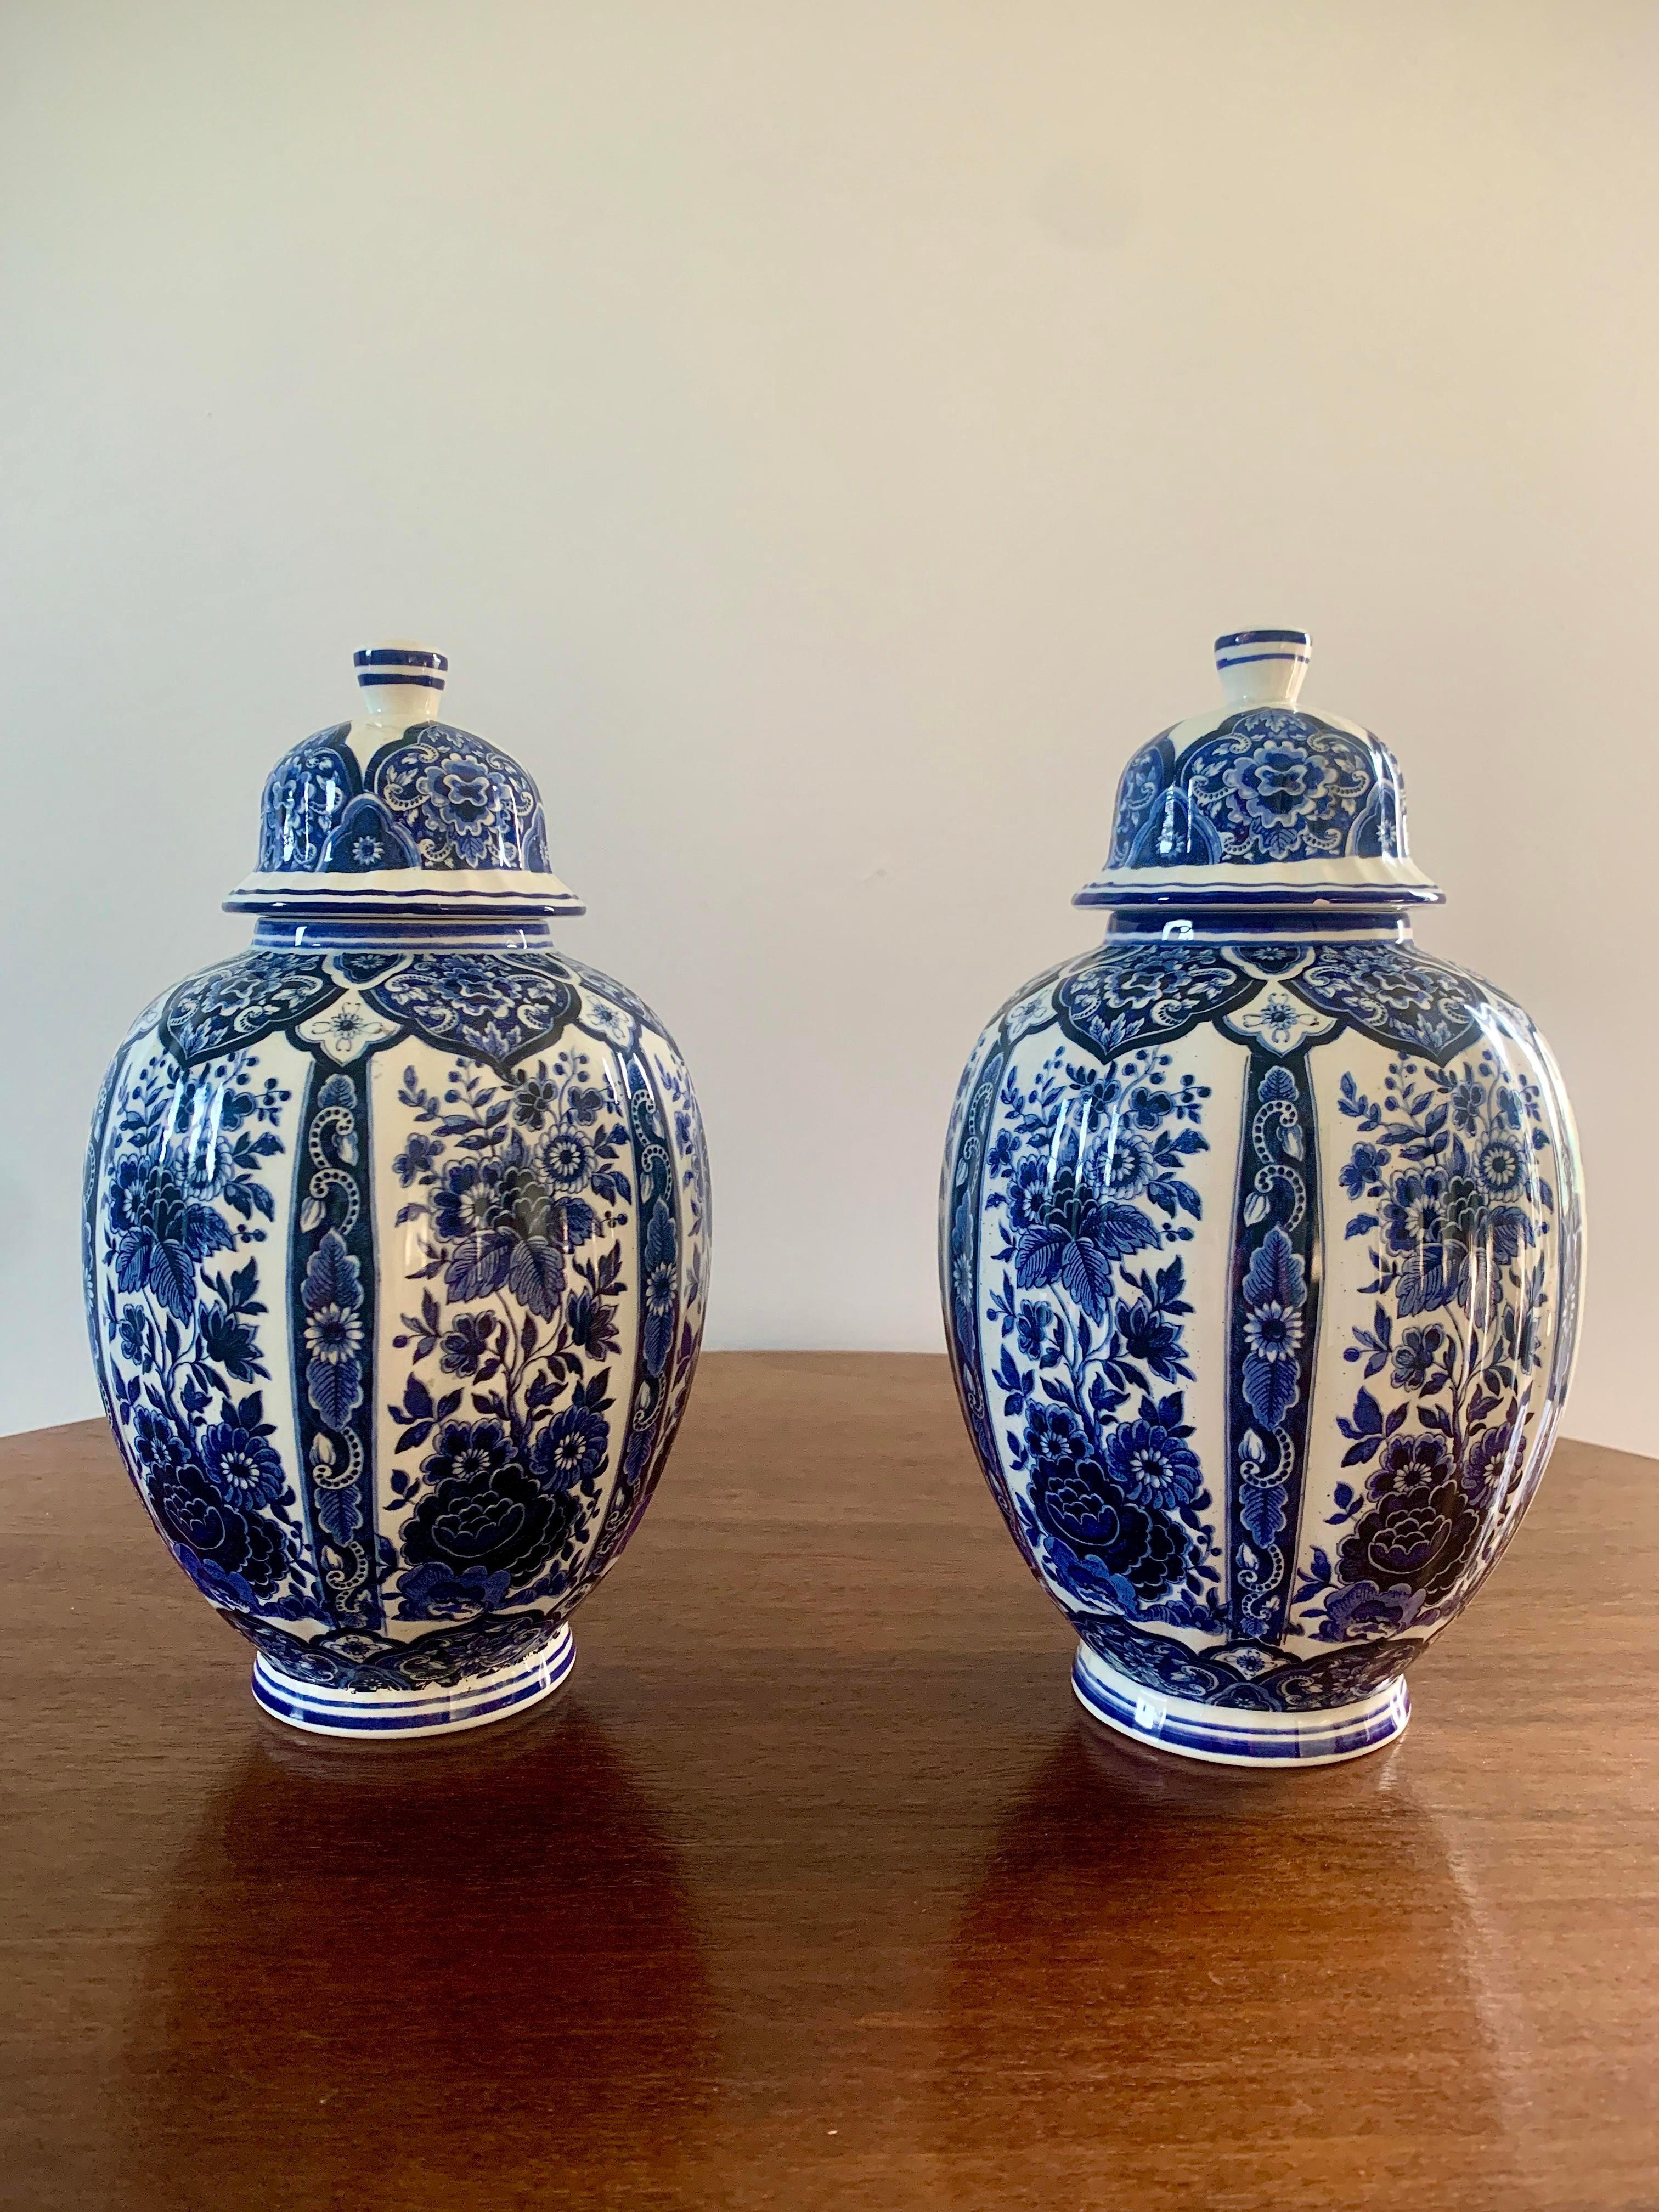 A pair of beautiful Italian blue and white porcelain covered ginger jars 

By Ardalt Blue Delfia

Italy, Mid-20th Century

Measures: 5.25